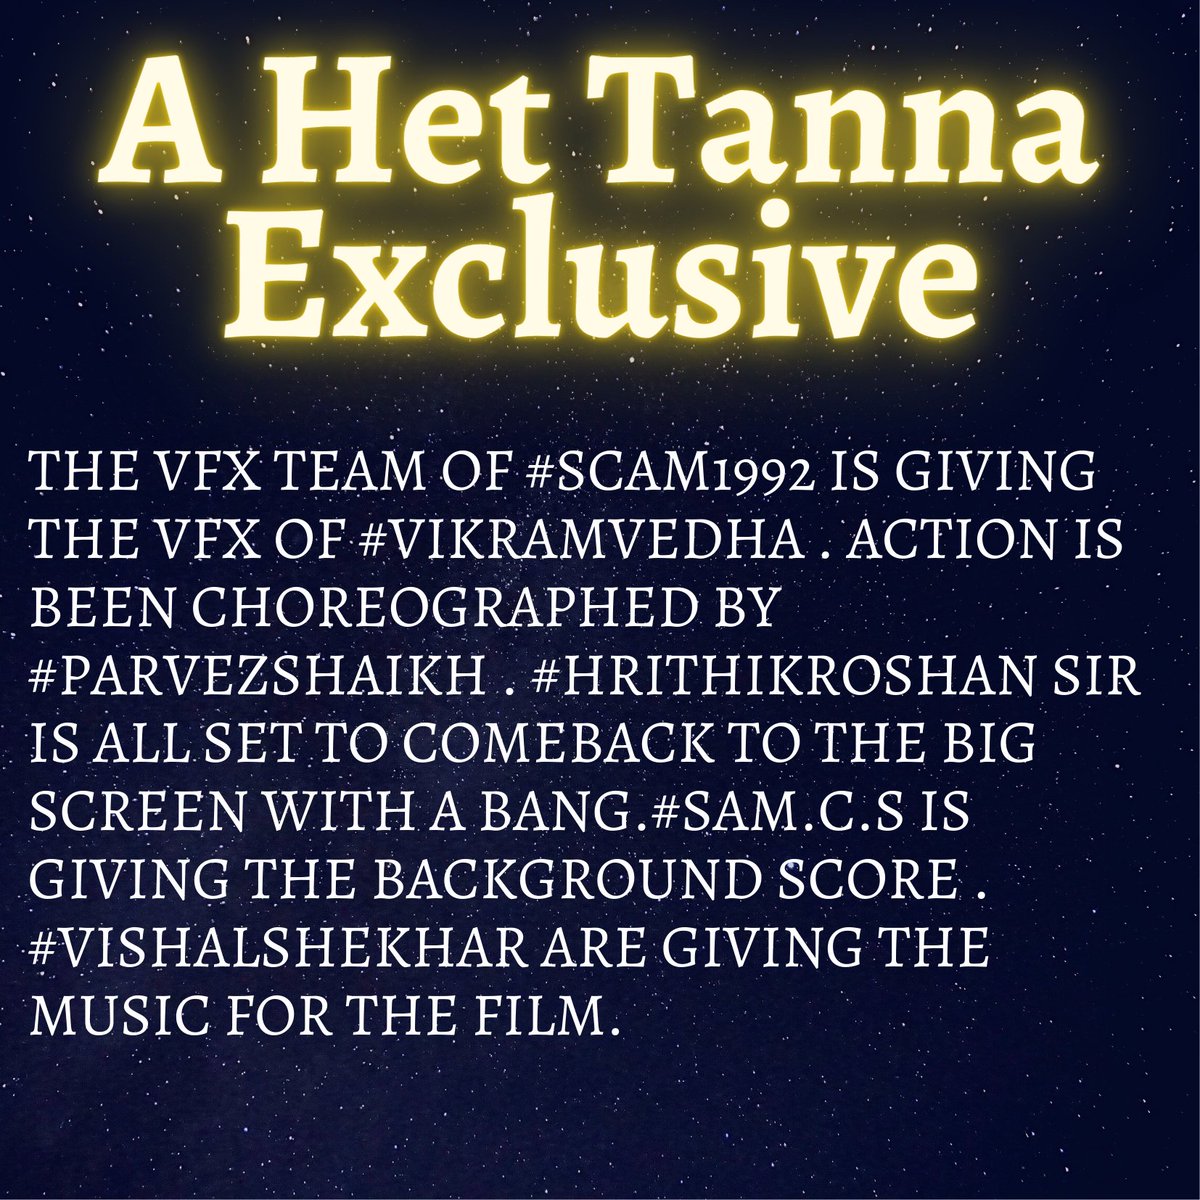 #AHetTannaExclusive :-
The VFX team of #Scam1992 is Giving the VFX of #VikramVedha.Action Director is #ParvezShaikh .#HrithikRoshan sir is all set to comeback to the big screen with a bang.#Sam.C.S is giving the background score.#VishalShekhar are giving the music for the film.🔥